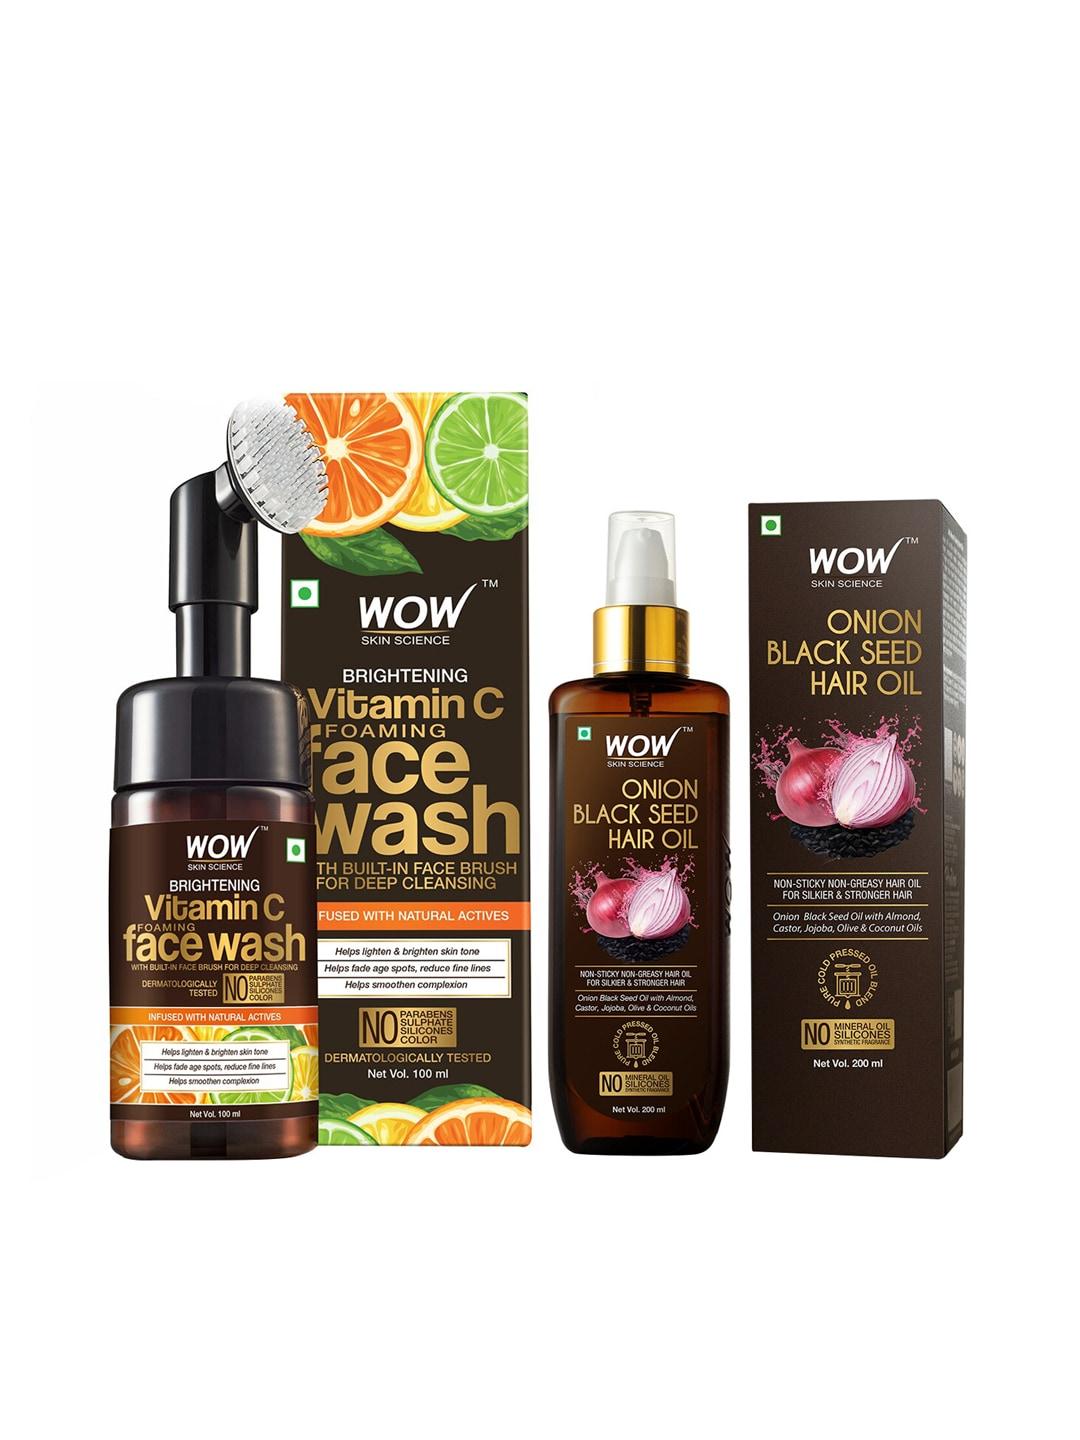 WOW SKIN SCIENCE Set of Onion Black Seed Hair Oil & Brightening Vitamin C Face Wash